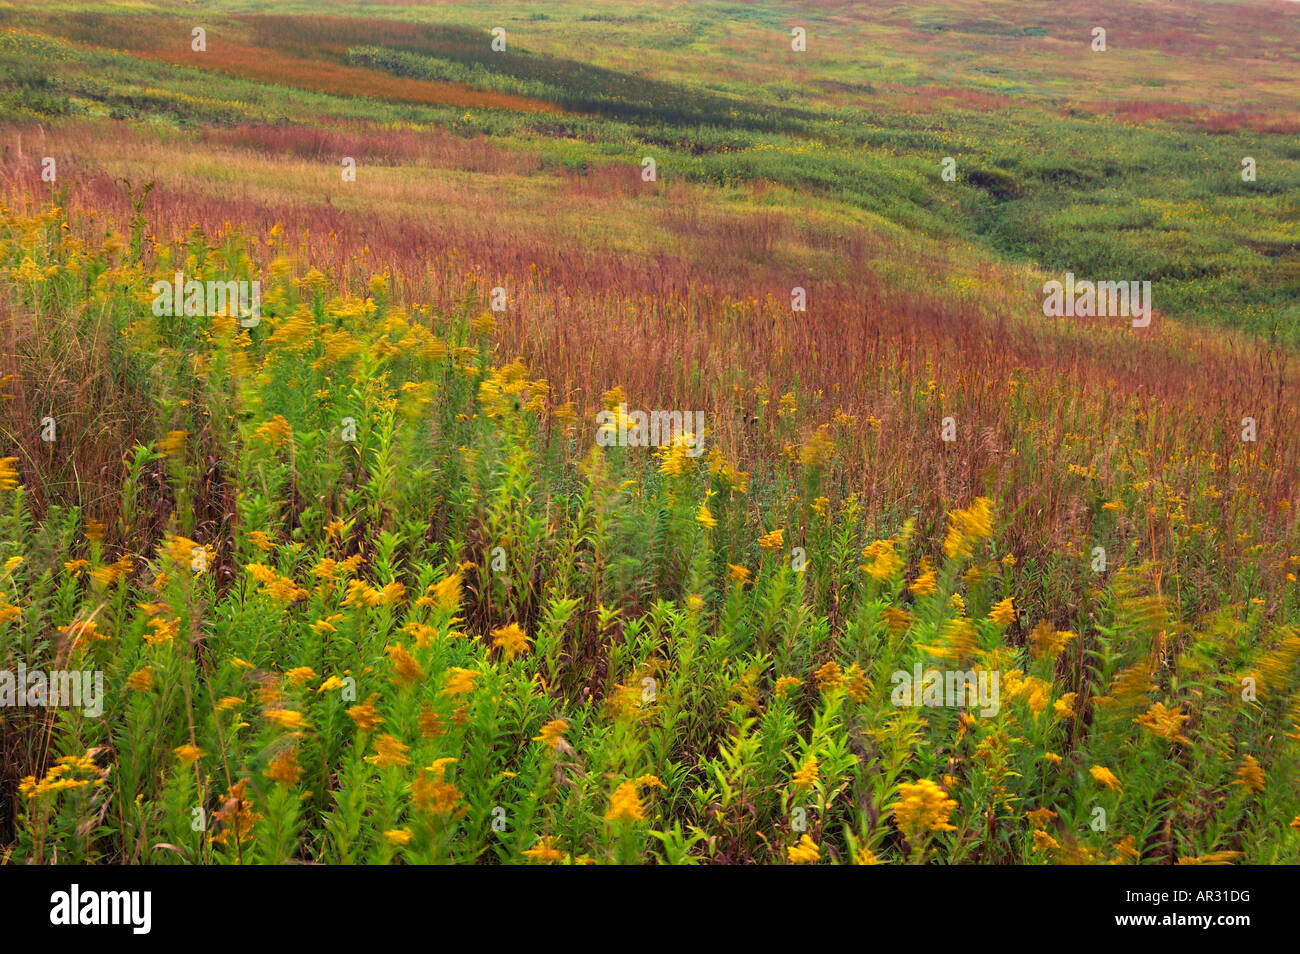 stiff goldenrod and other native plants, Fen Valley, Clay County, Iowa USA Stock Photo